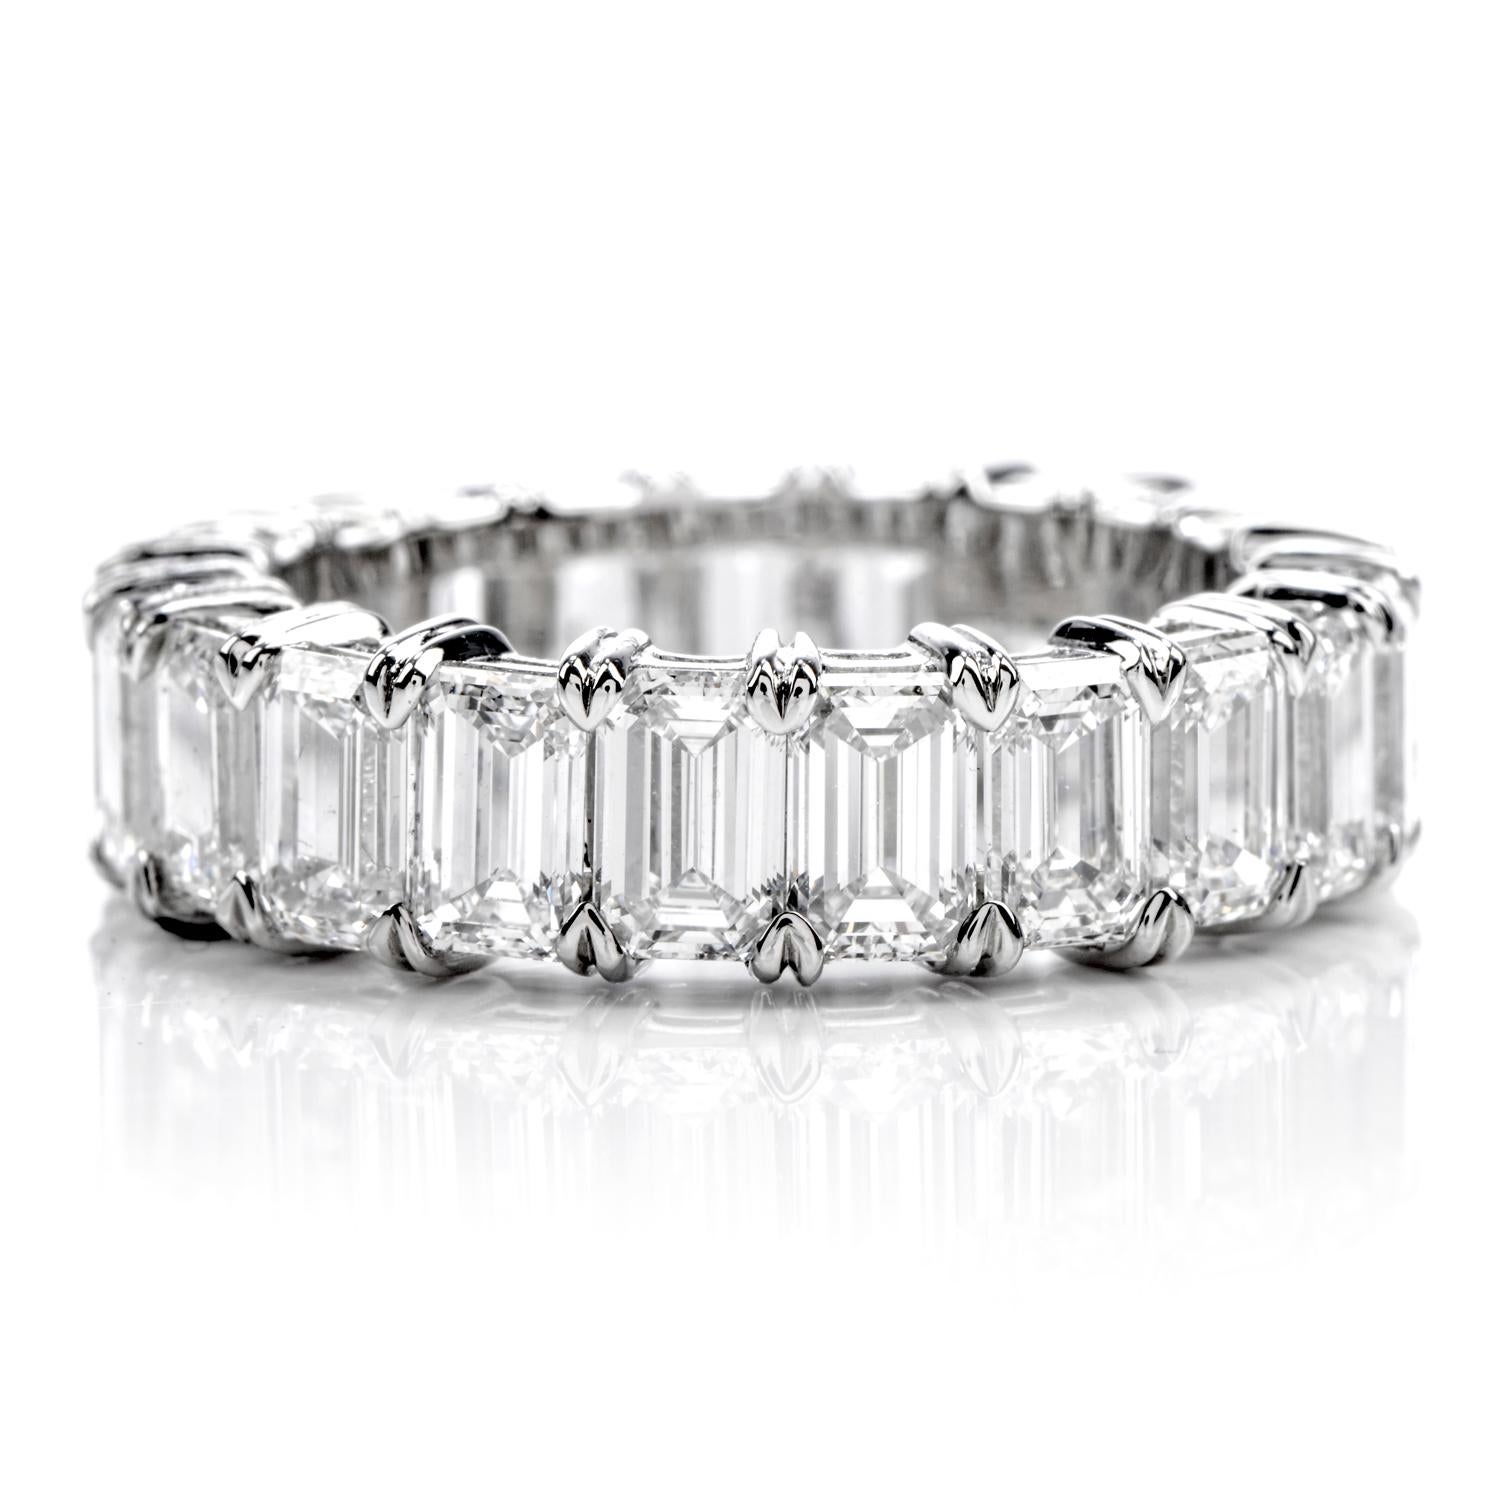 A Refined Elegance is a statement describing this incredible

GIA Certified Emerald Cut Eternity Band Ring.

21 Vibrant, White Emerald Cut Diamonds wrap around this hand made band from end to end. 

ALL of D-E-F color and Flawless, VVS1 to VS1